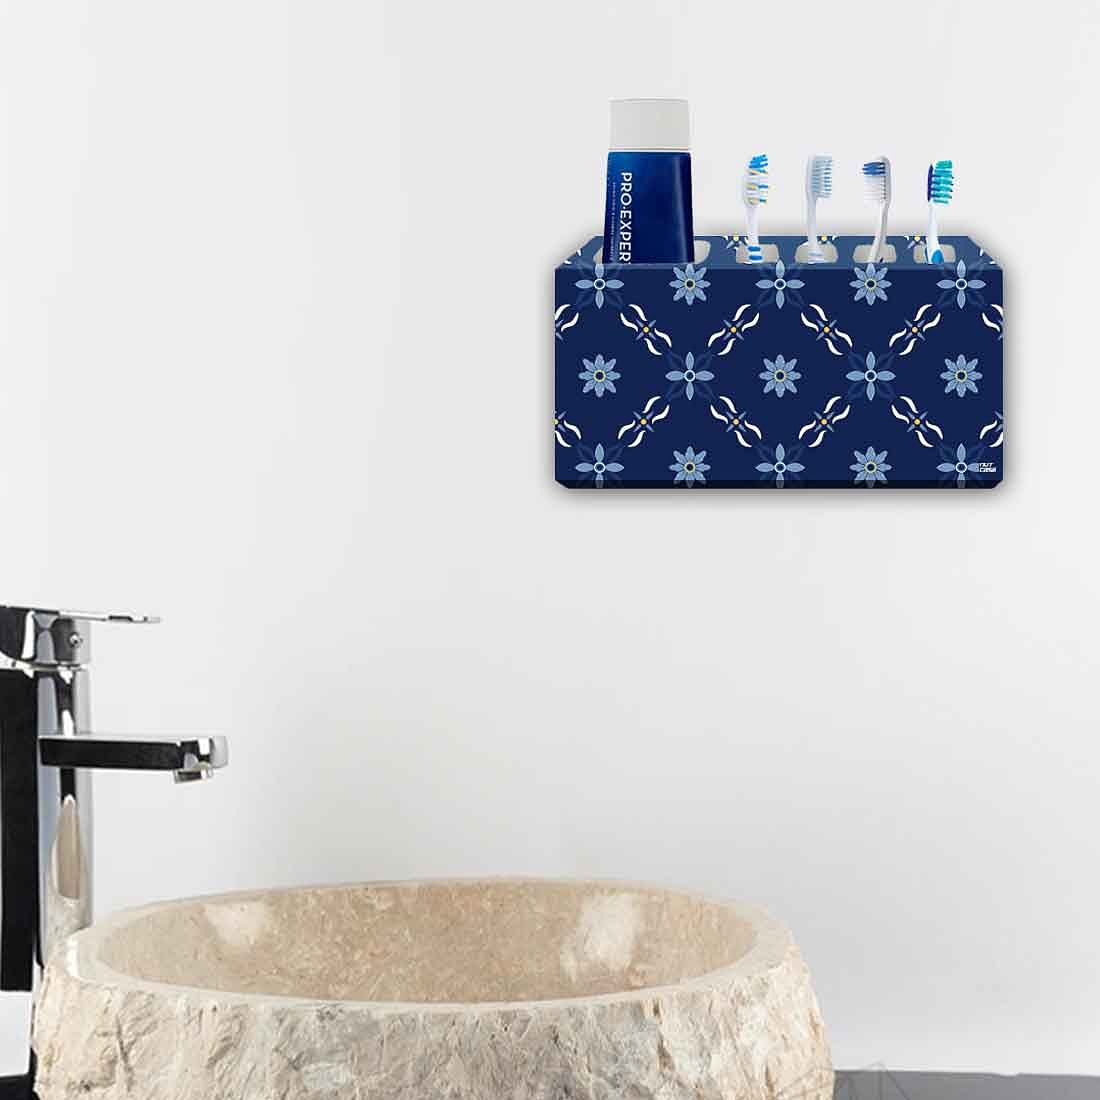 Toothbrush Holder Wall Mounted -Floral Pattern Nutcase